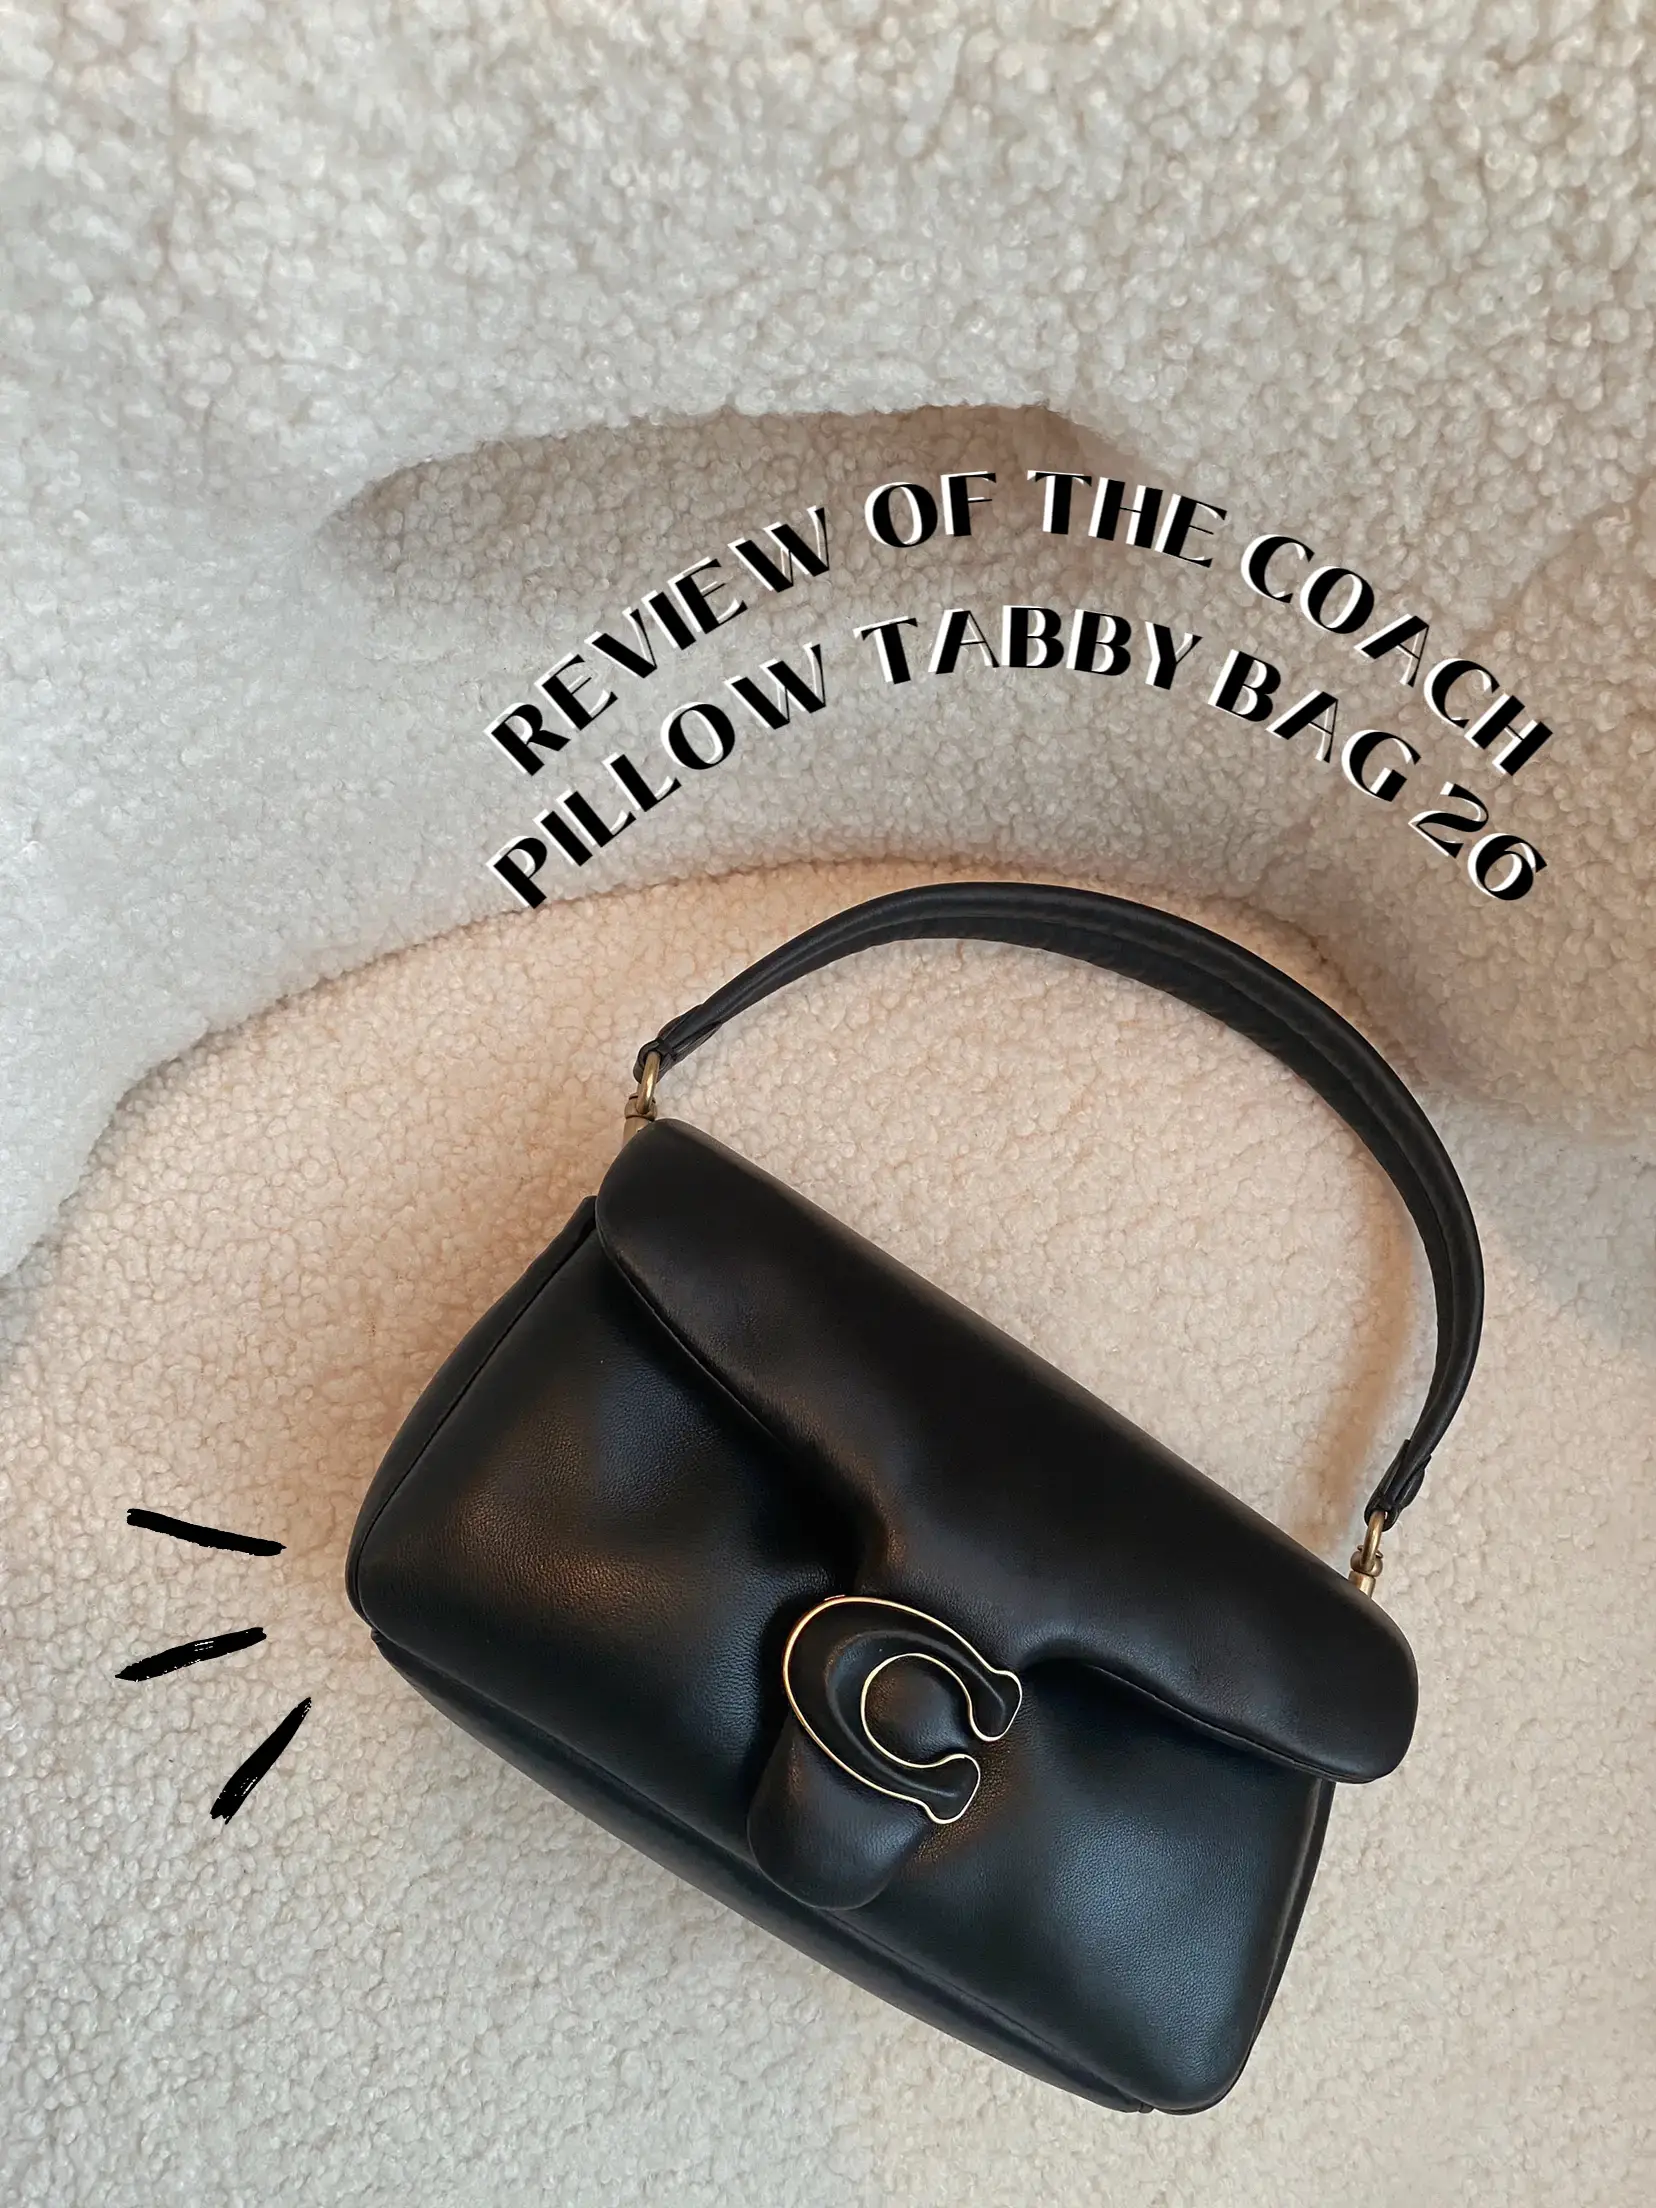 The Coach Pillow Tabby: Which One To Buy (18 or 26) 